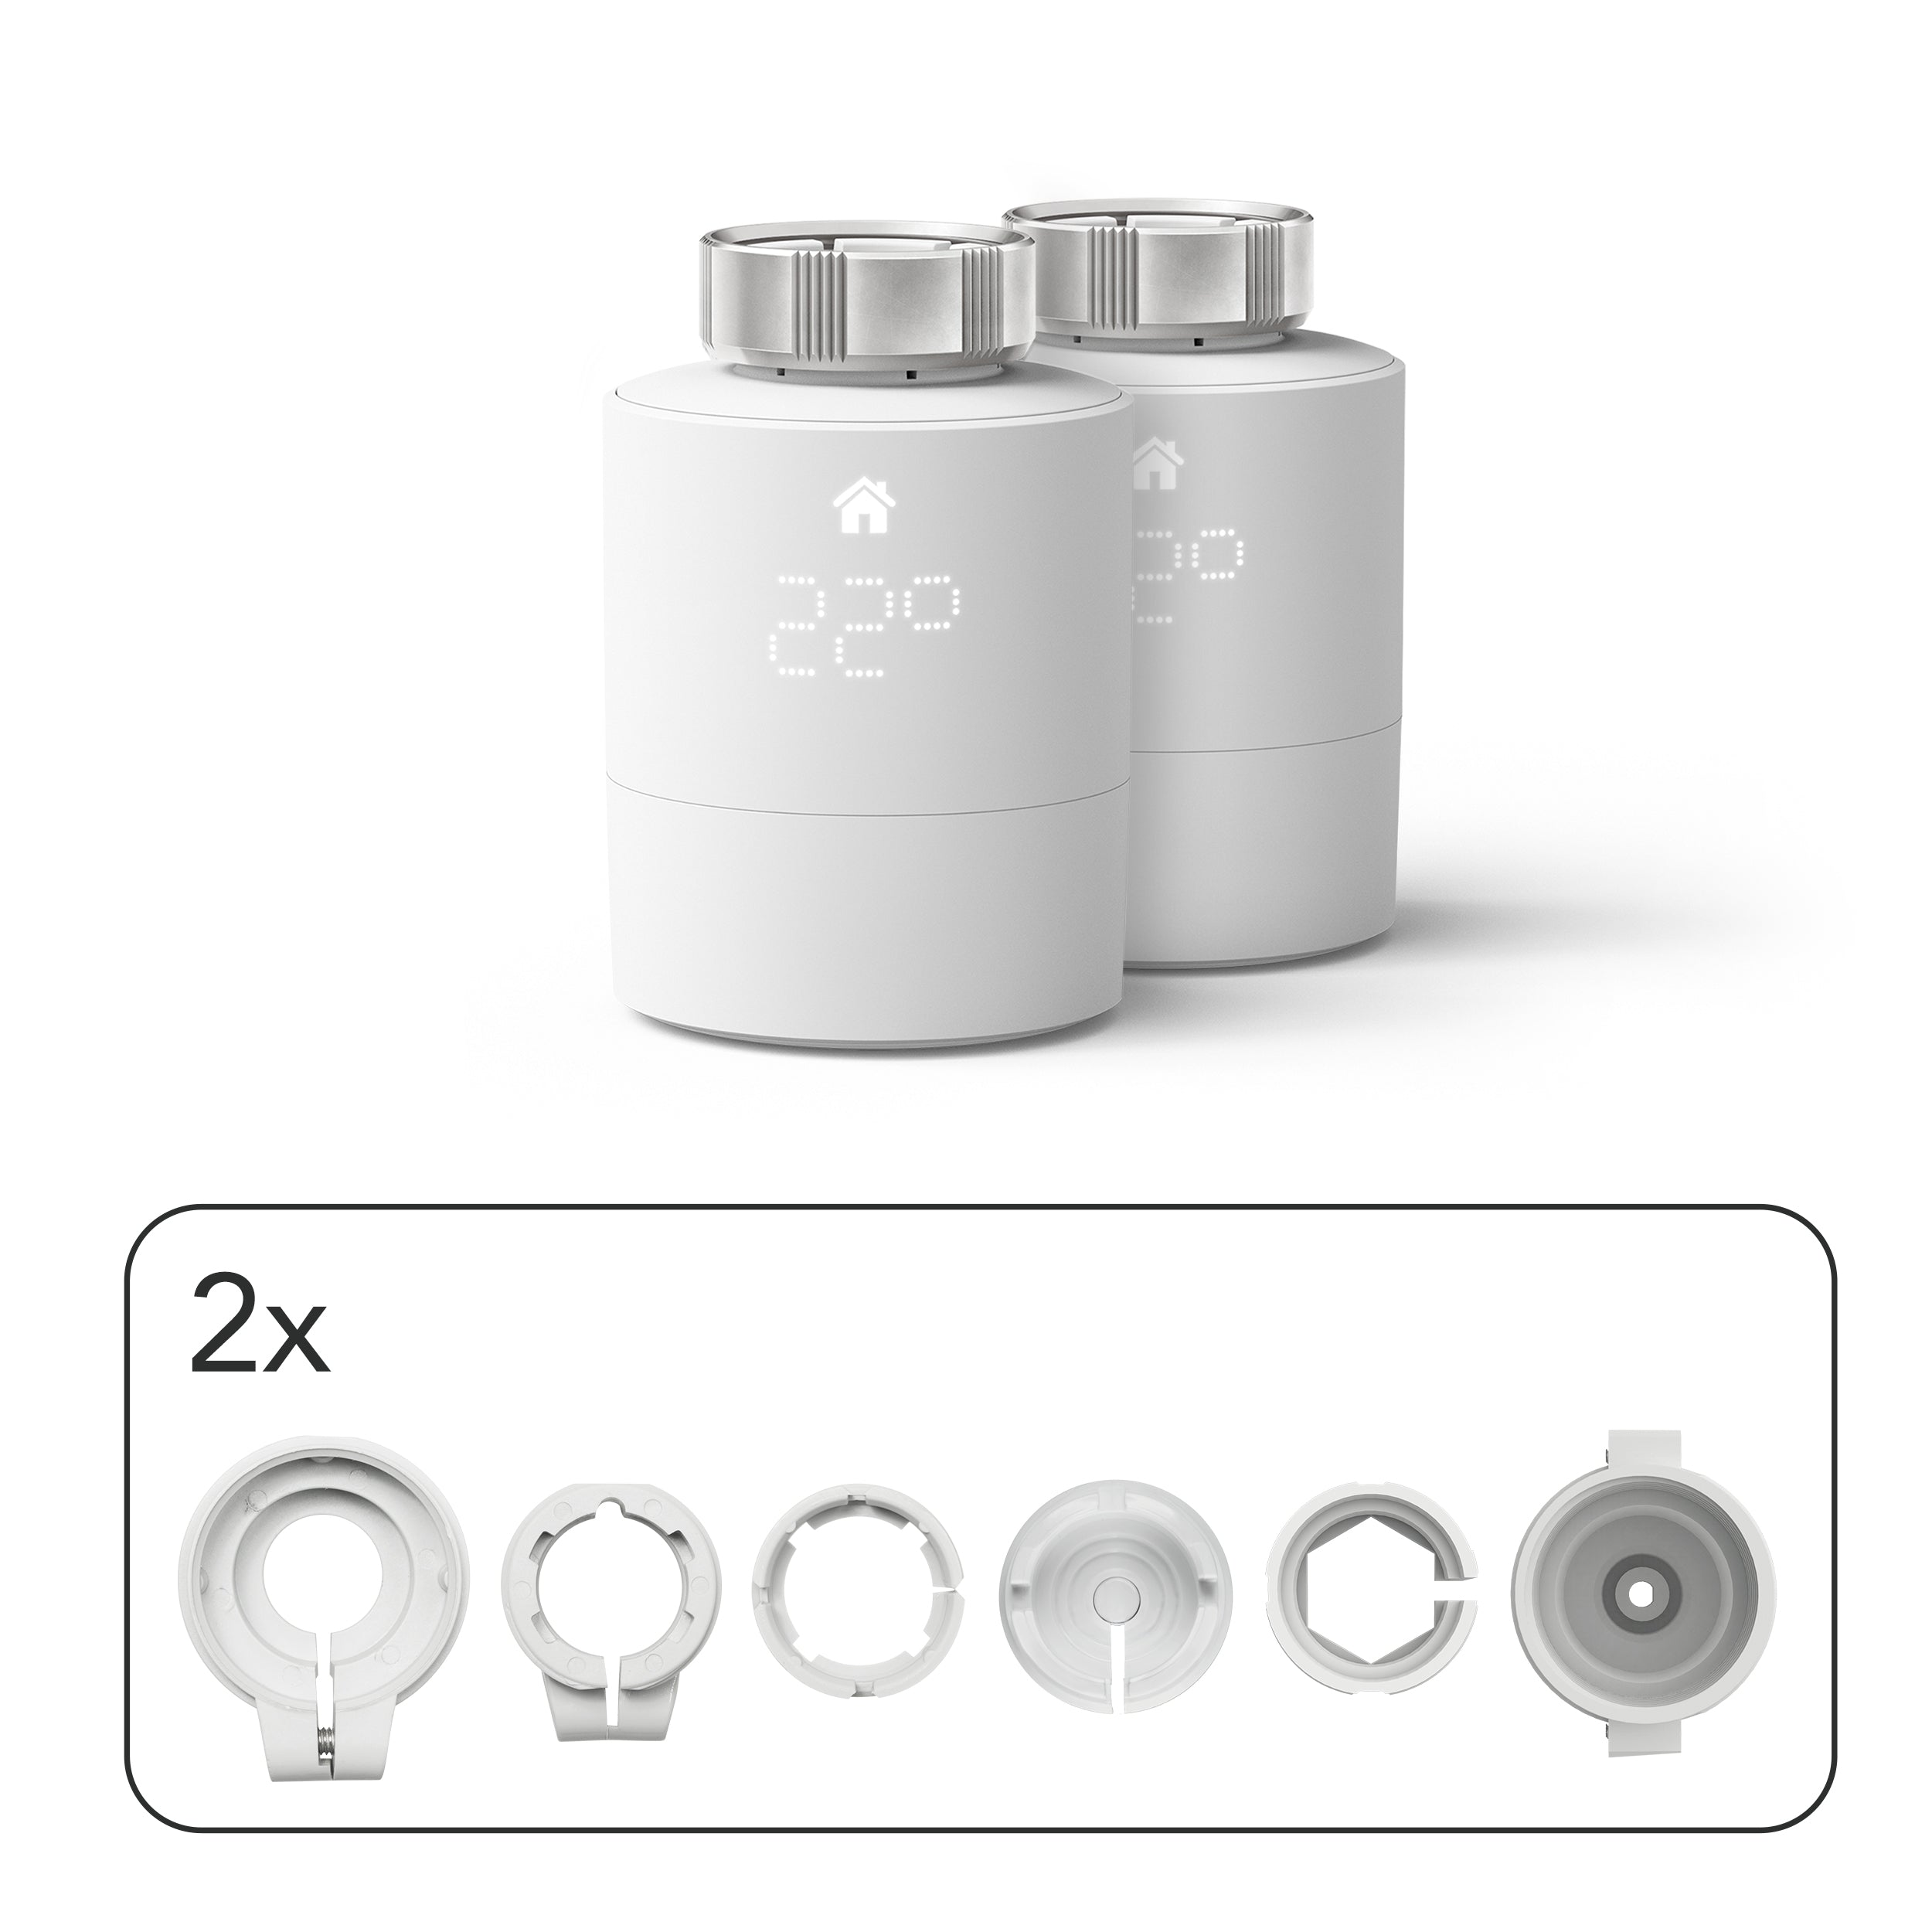 Smart Radiator Button - Duo Pack